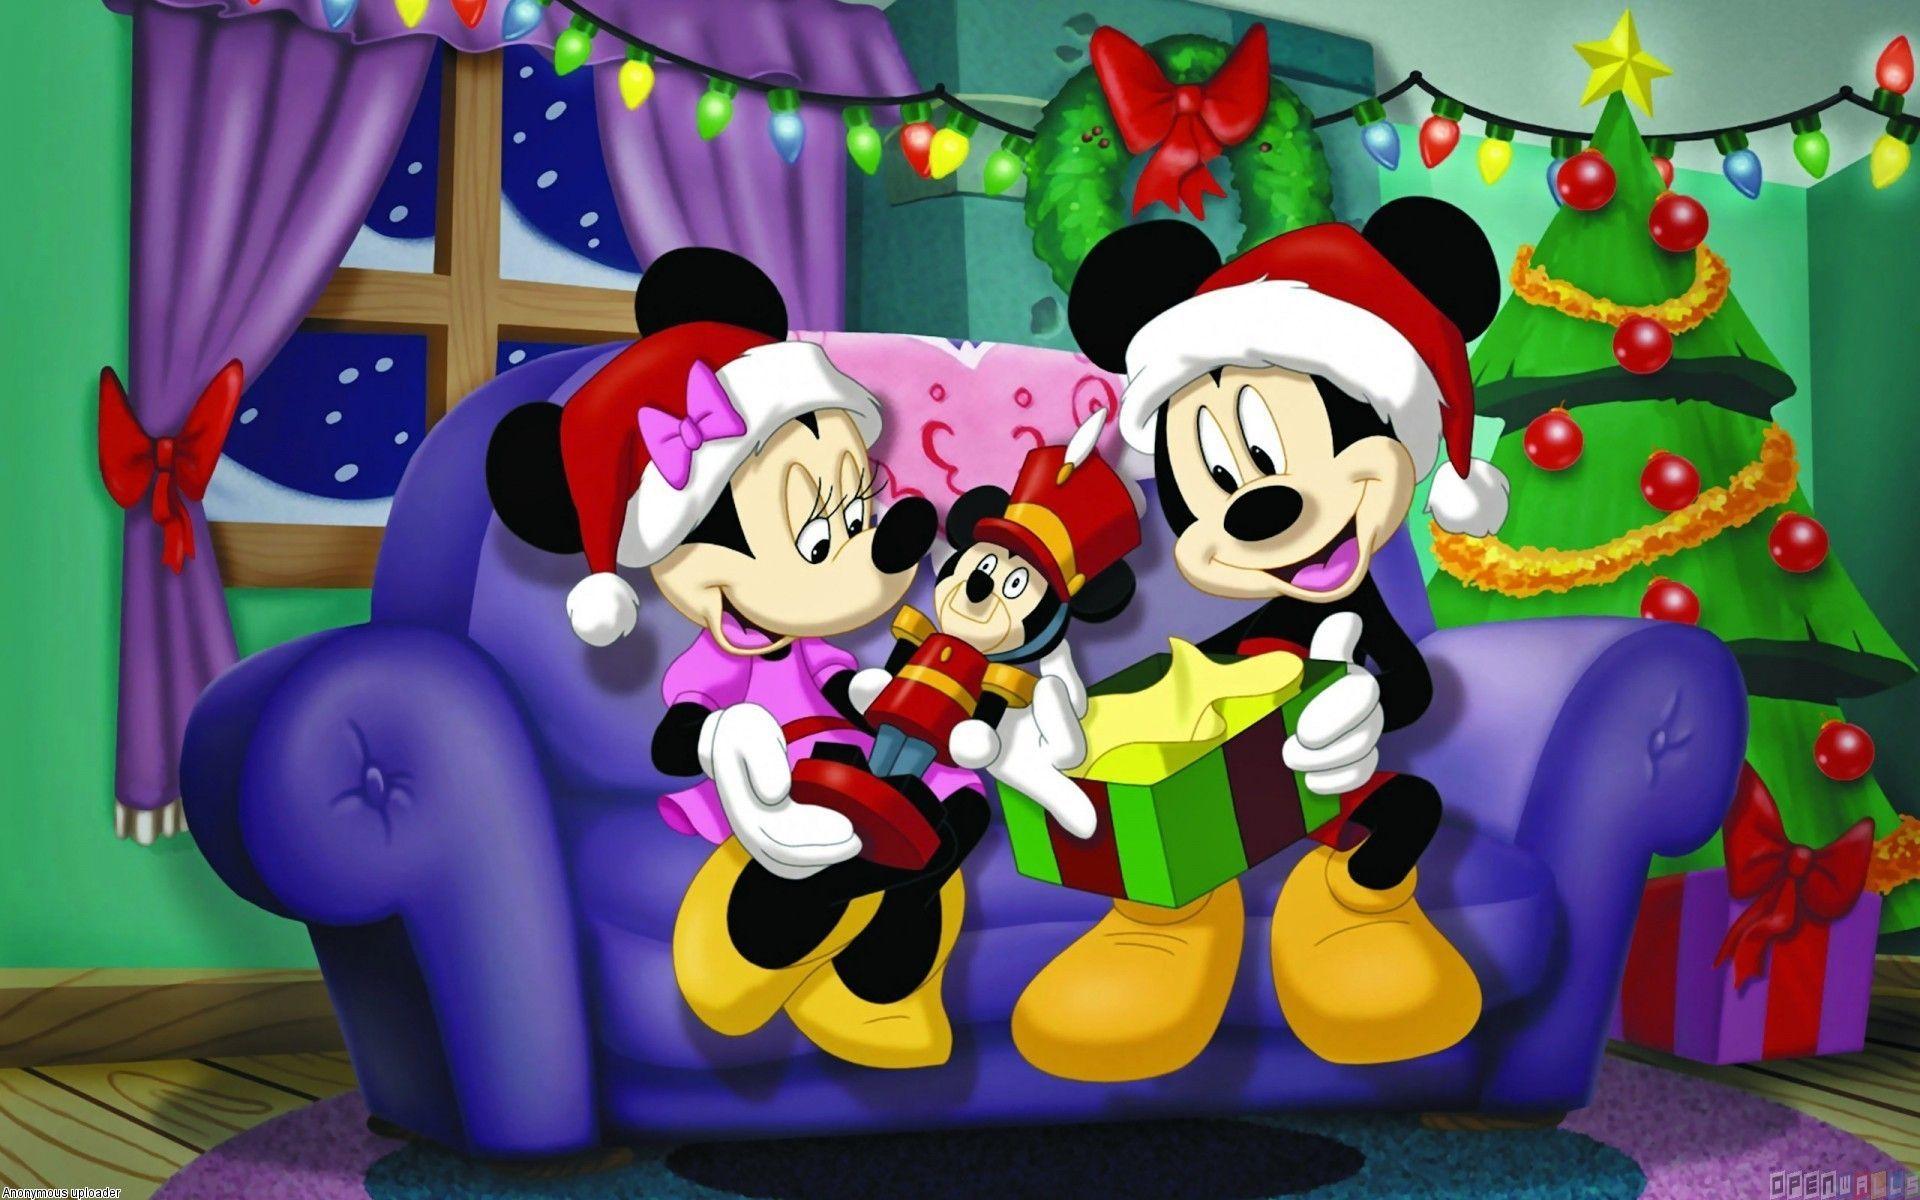 More Minnie wallpaper. Mickey Mouse wallpaper